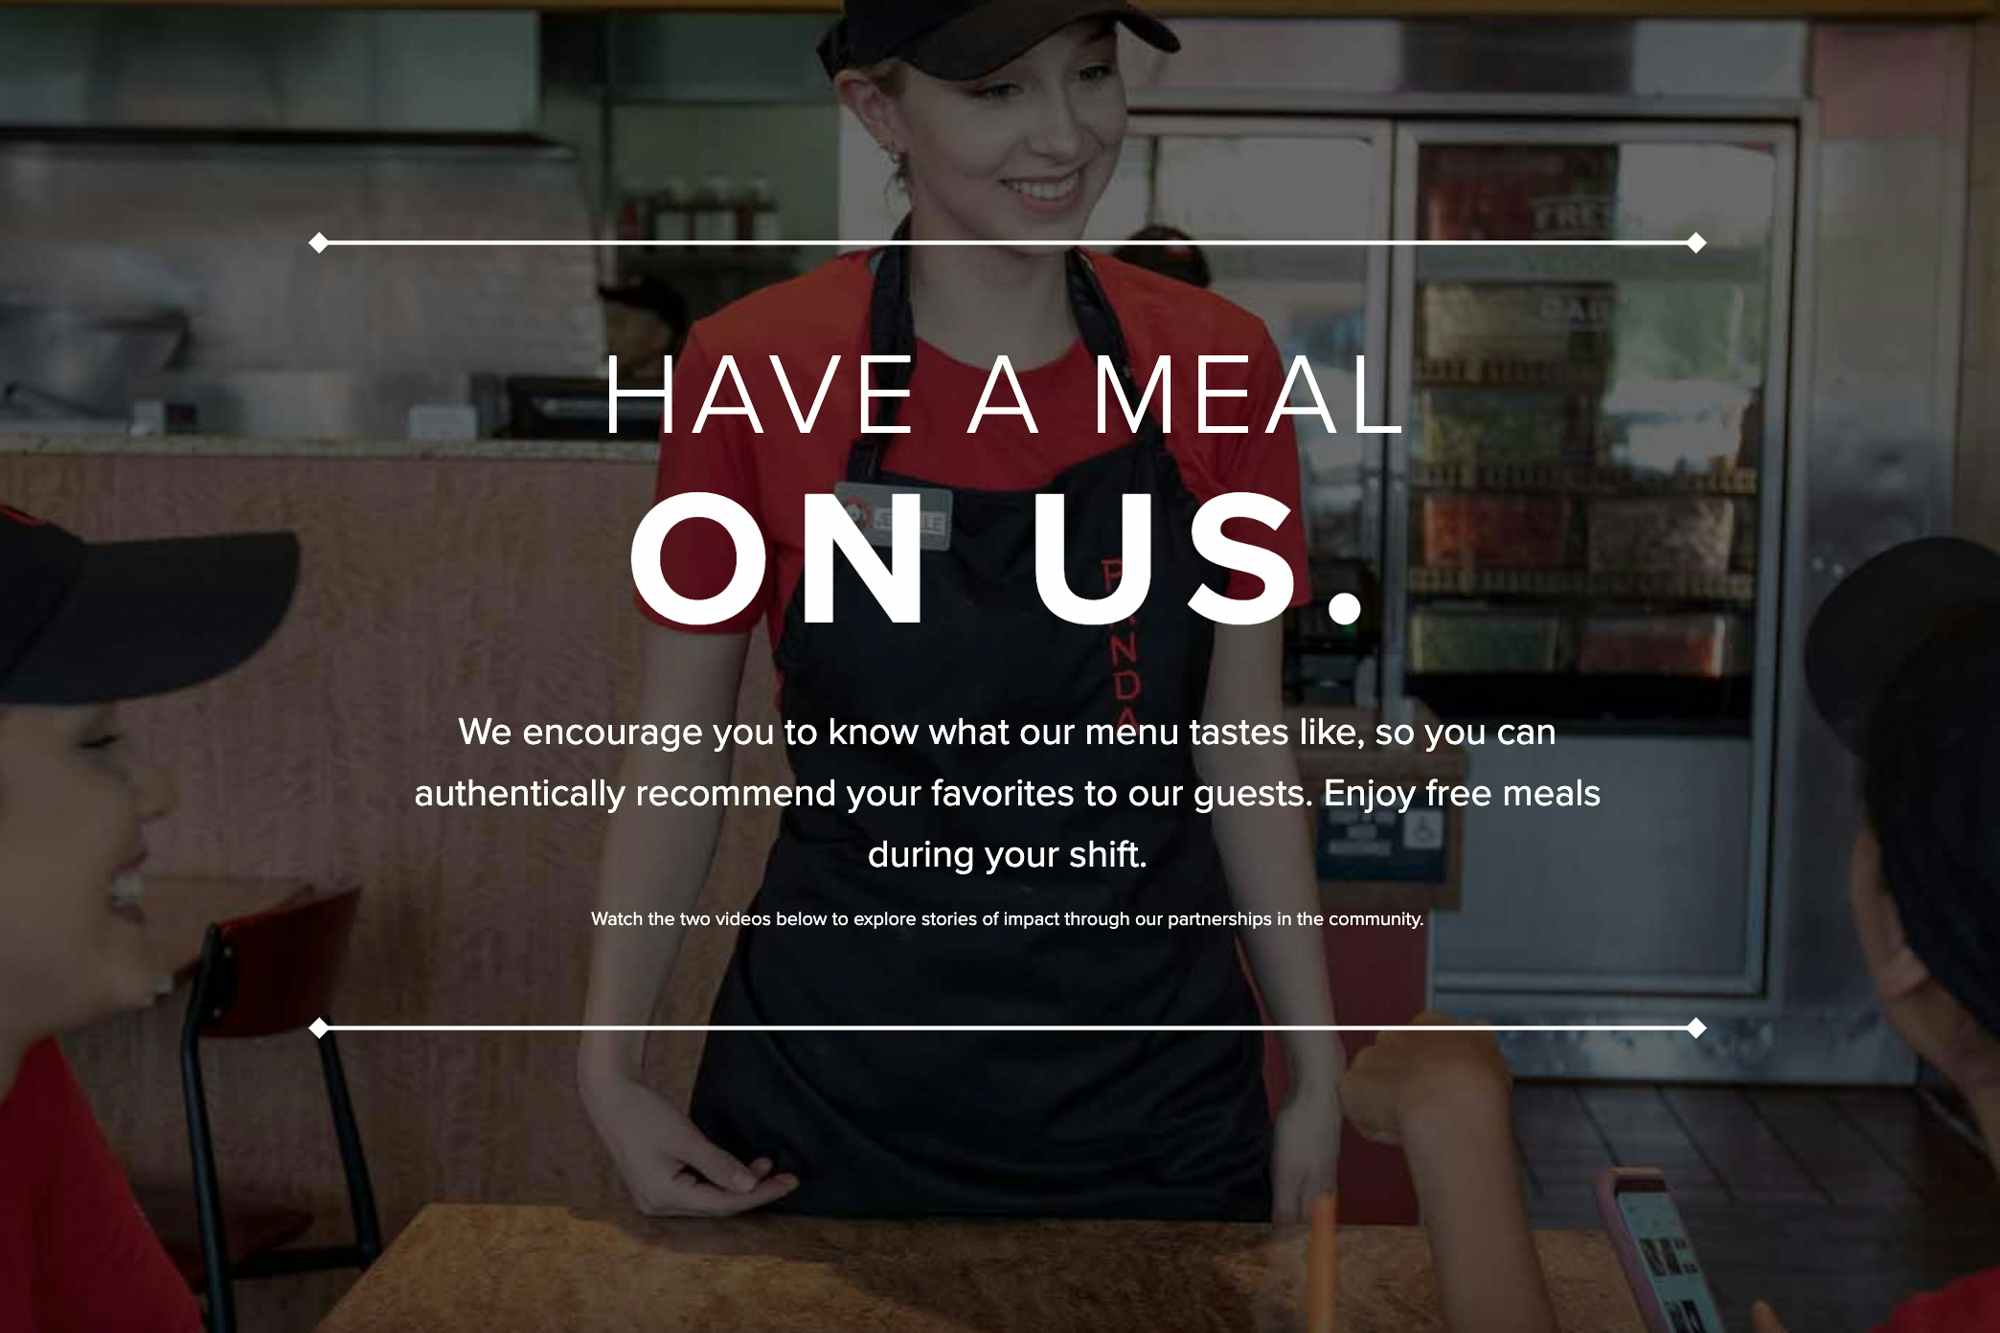 A graphic from the Panda Express careers website that says, "Have a meal on us. We encourage you to know what our menu tastes like, so you can authentically recommend your favorites to our guests. Enjoy free meals during your shift.